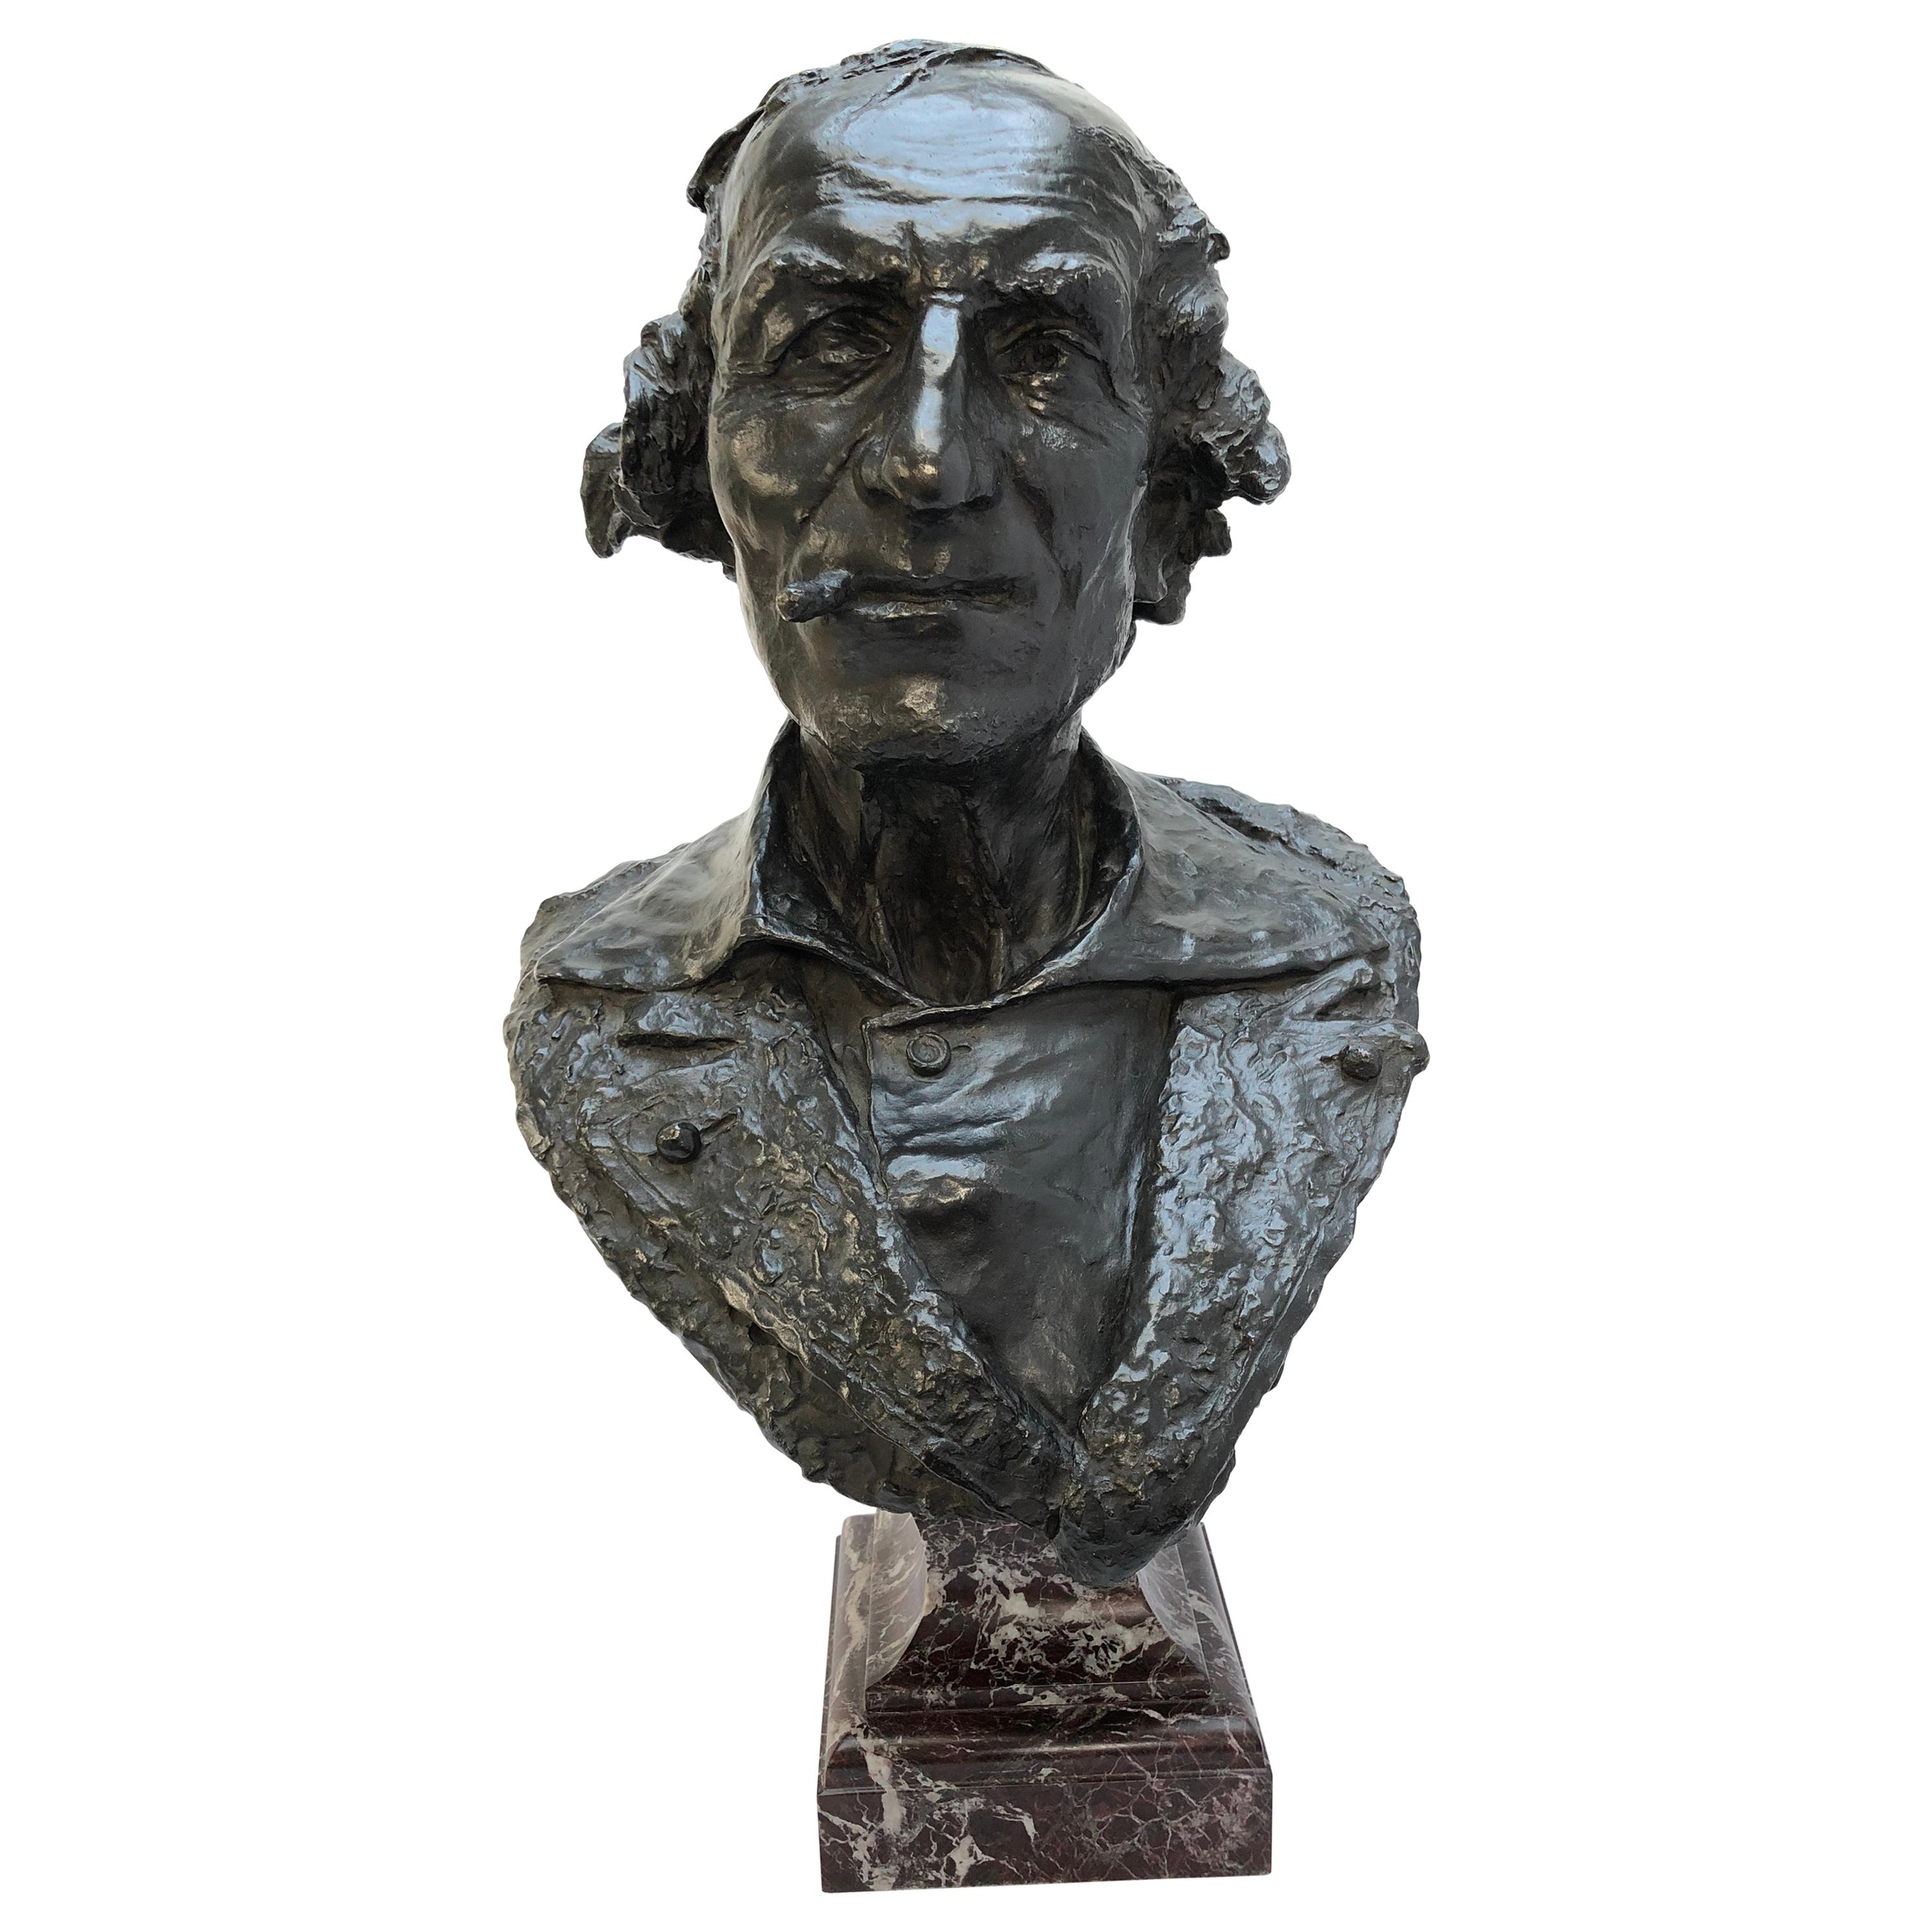 French Bronze Bust by Jean-Baptiste Carpeaux, Known as “Le Fumeur”, Dated 1869